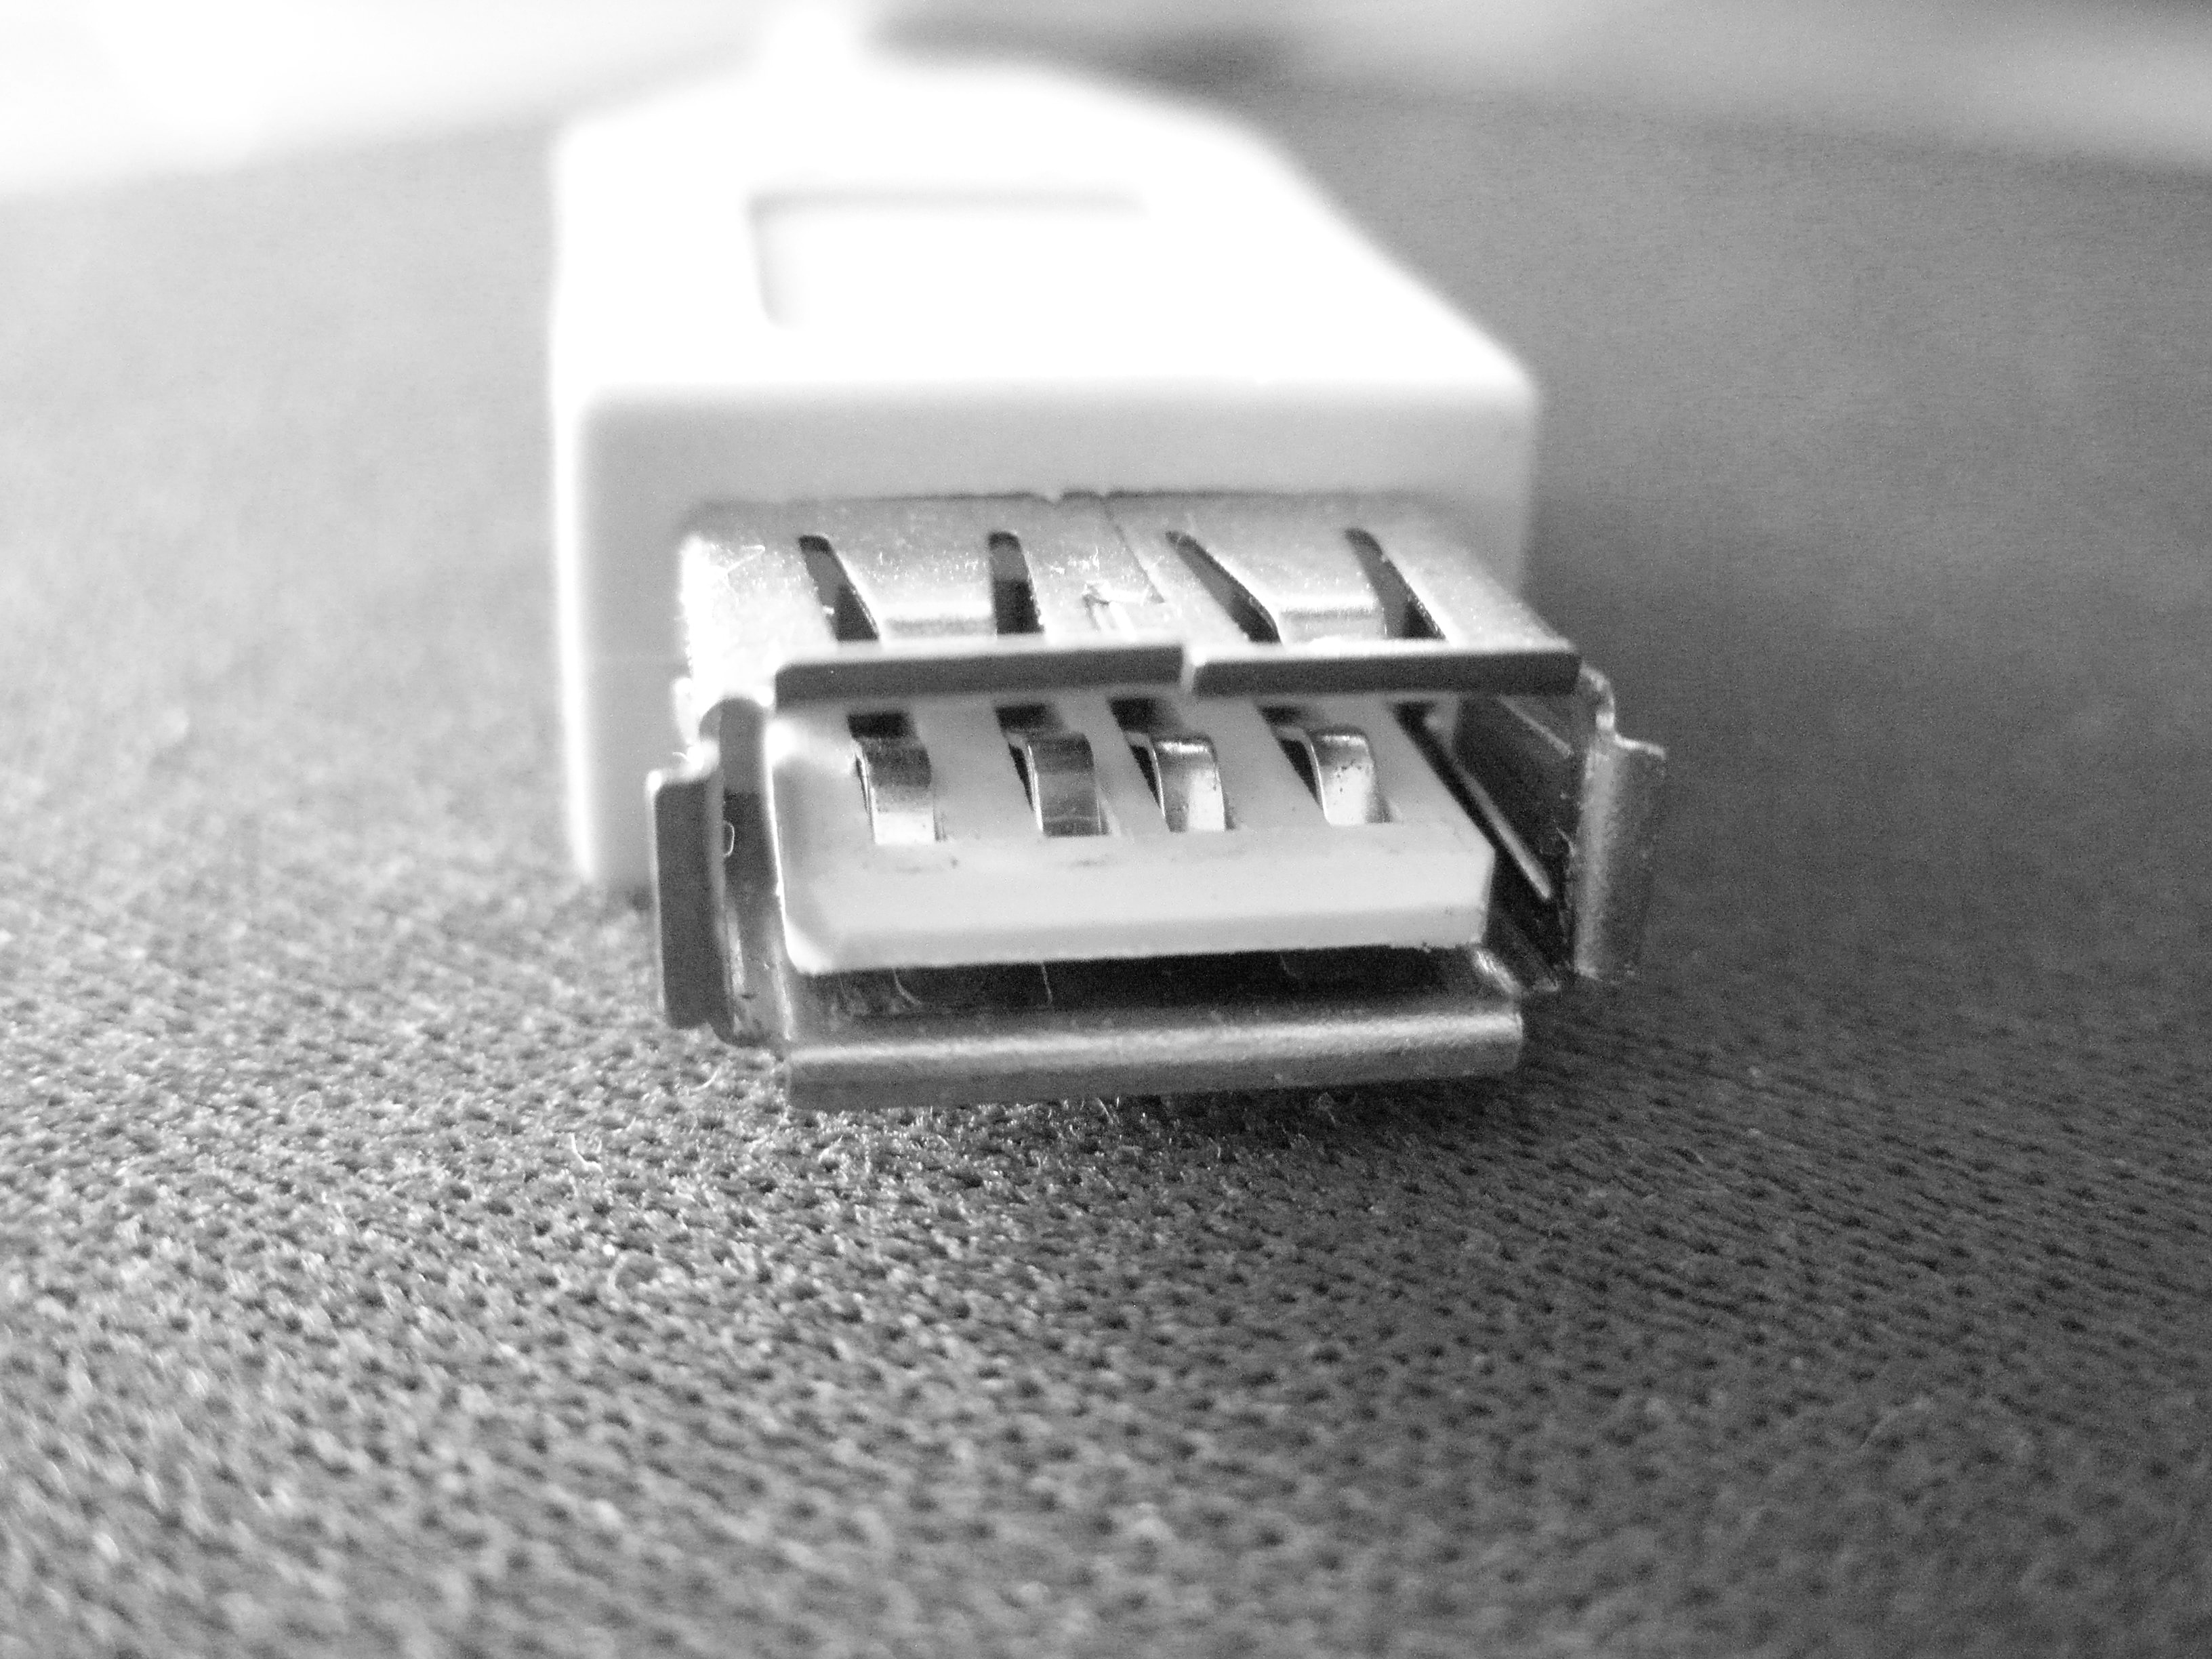 white USB cable placed on a gray textile